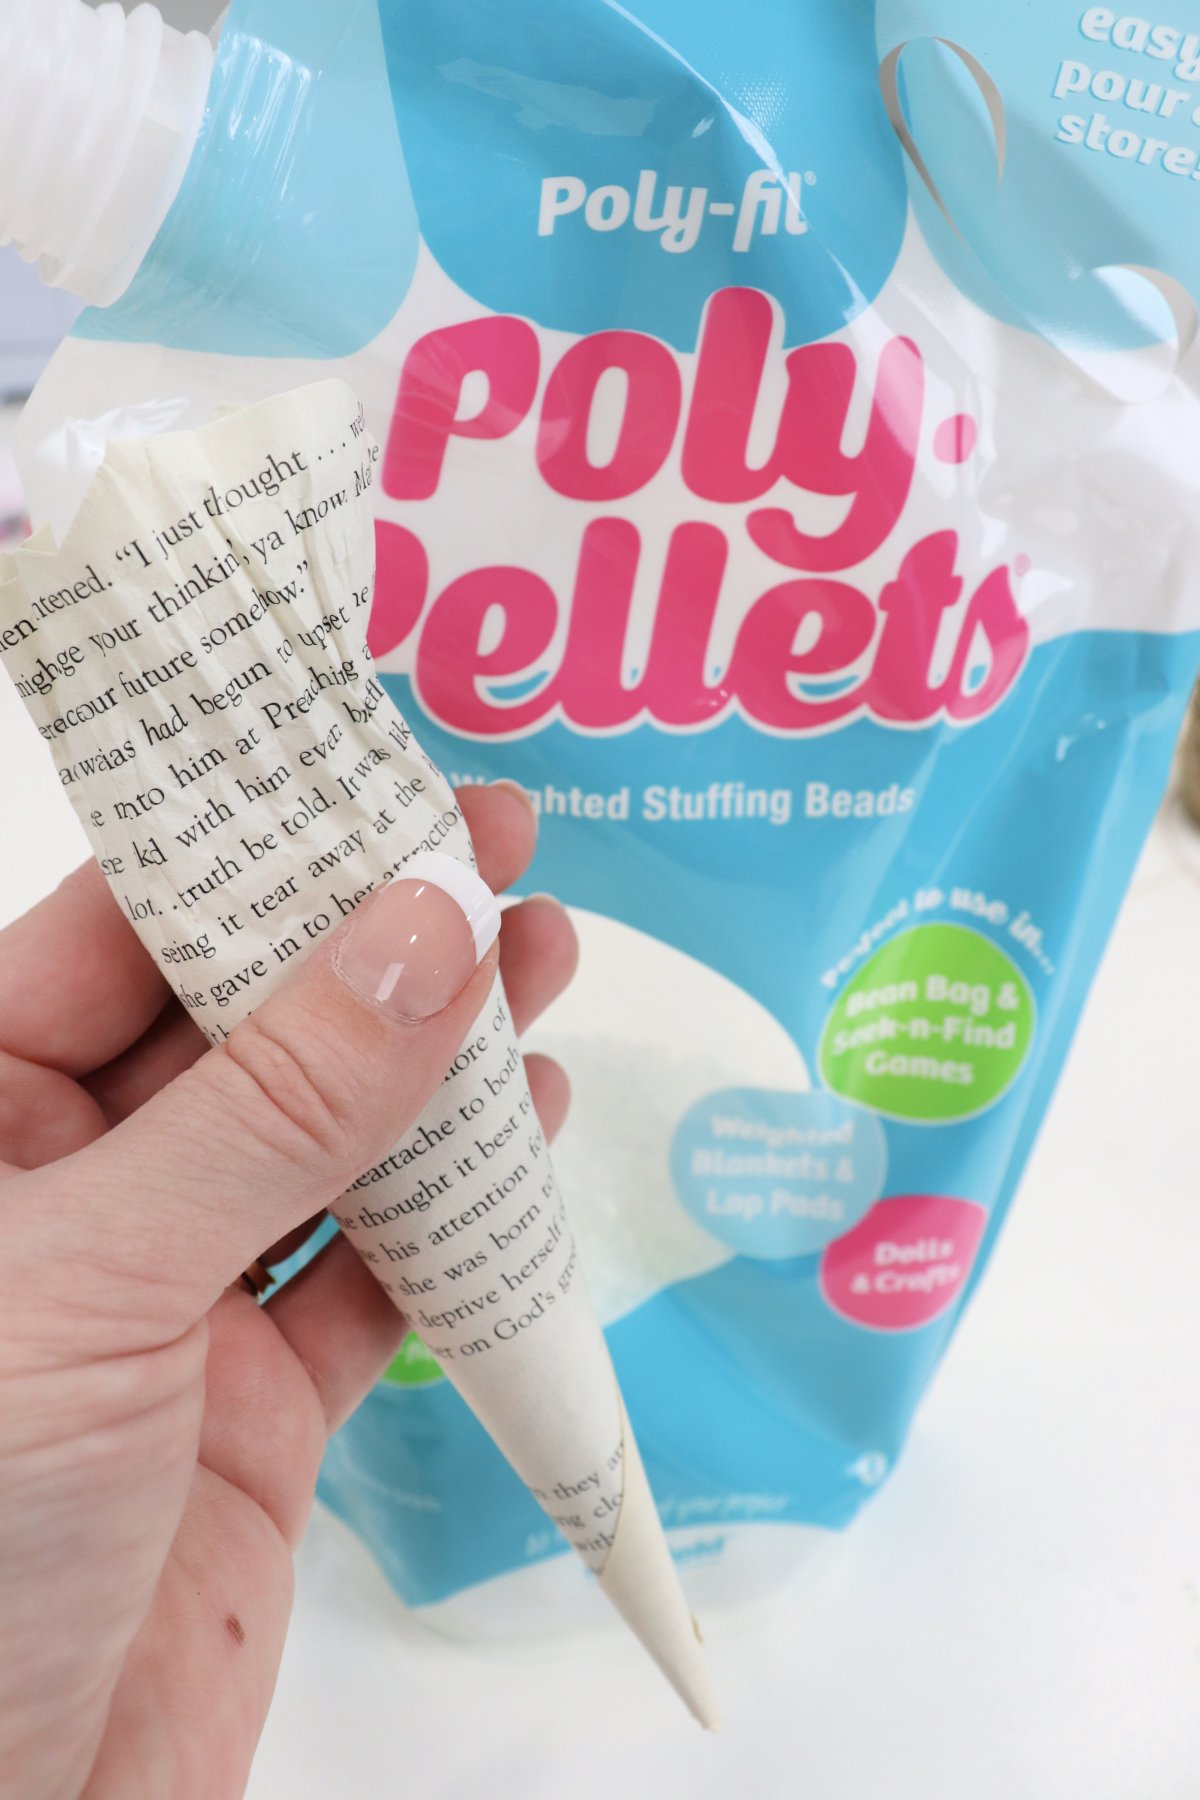 Image contains Amy's hand holding a book page rolled into a cone shape with a bag of Poly-Pellets in the background.